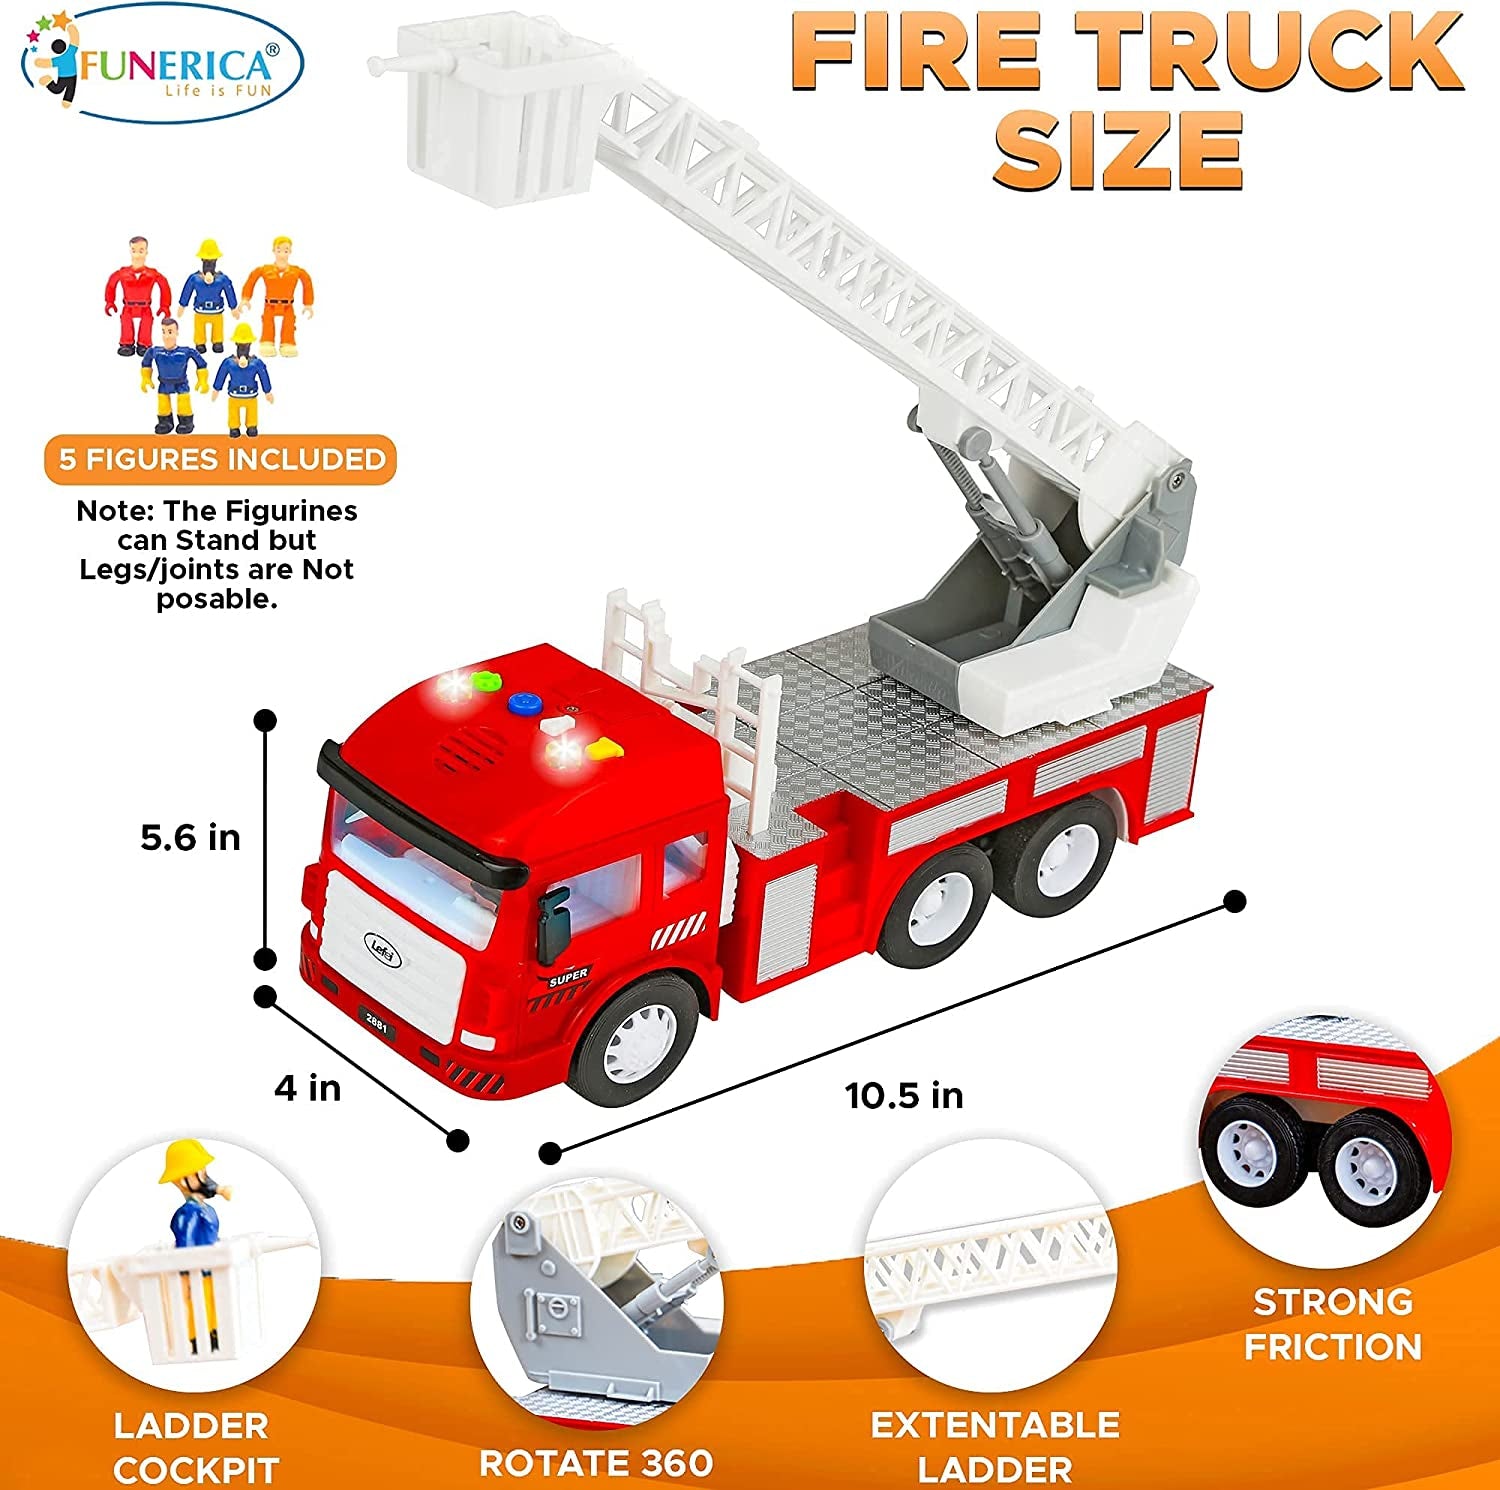 Fire Truck Toy with Flashing Lights, 4 Siren Sounds, Extending Rescue Ladder, Friction Strong Powered Firetruck Engine, Best Firefighter Playset Birthday Gift for Toddlers, Kids, Boys, Girls